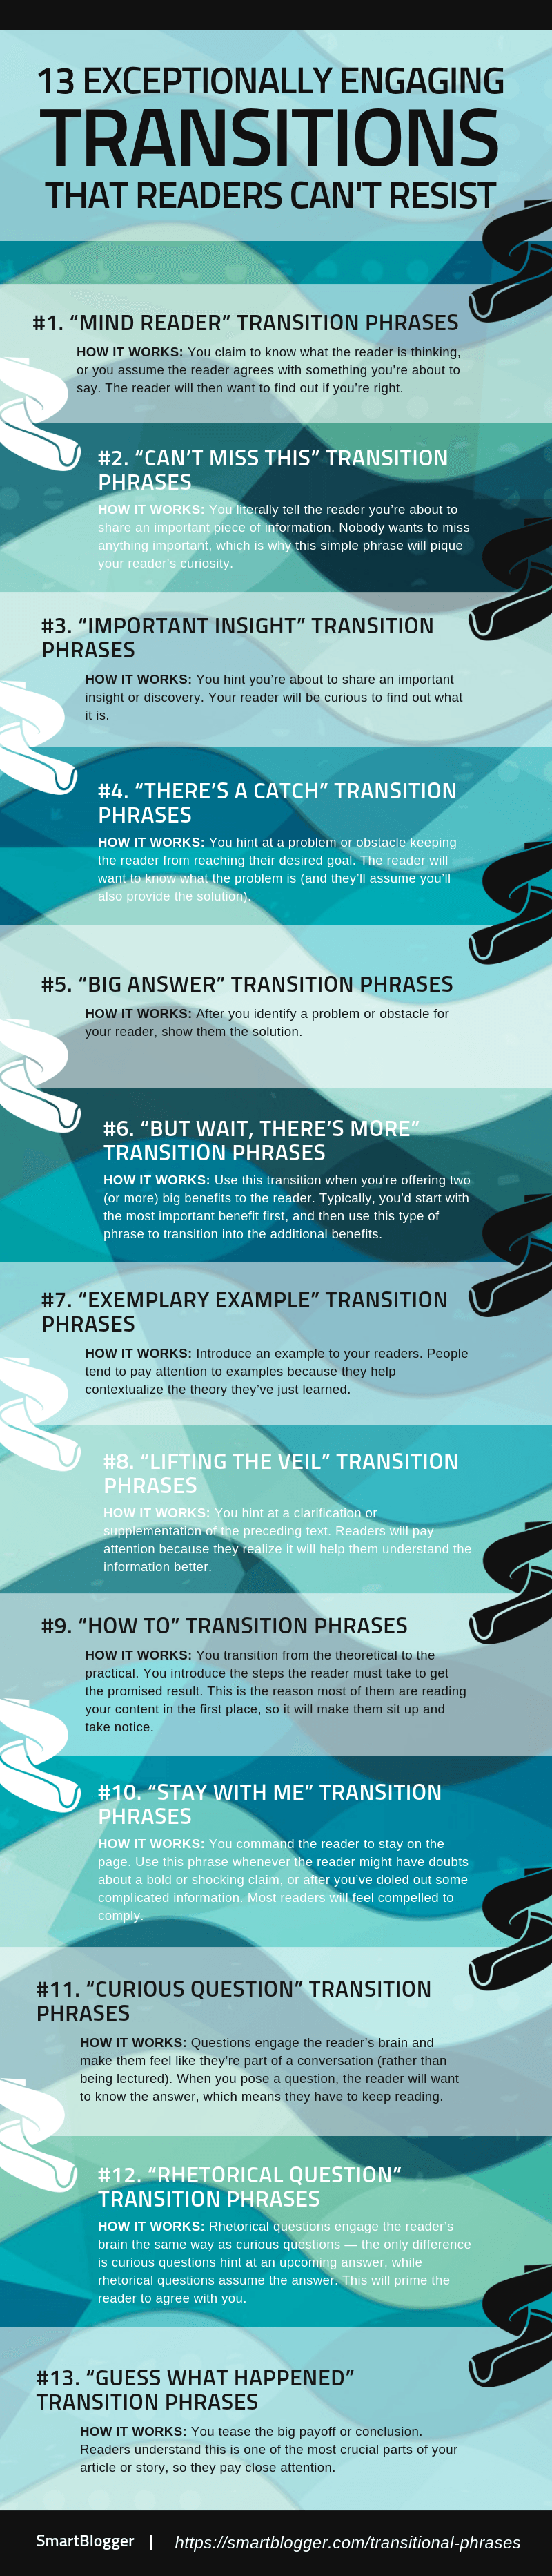 How to Use Transitional Words and Phrases to Make Your Writing Flow (with Examples)